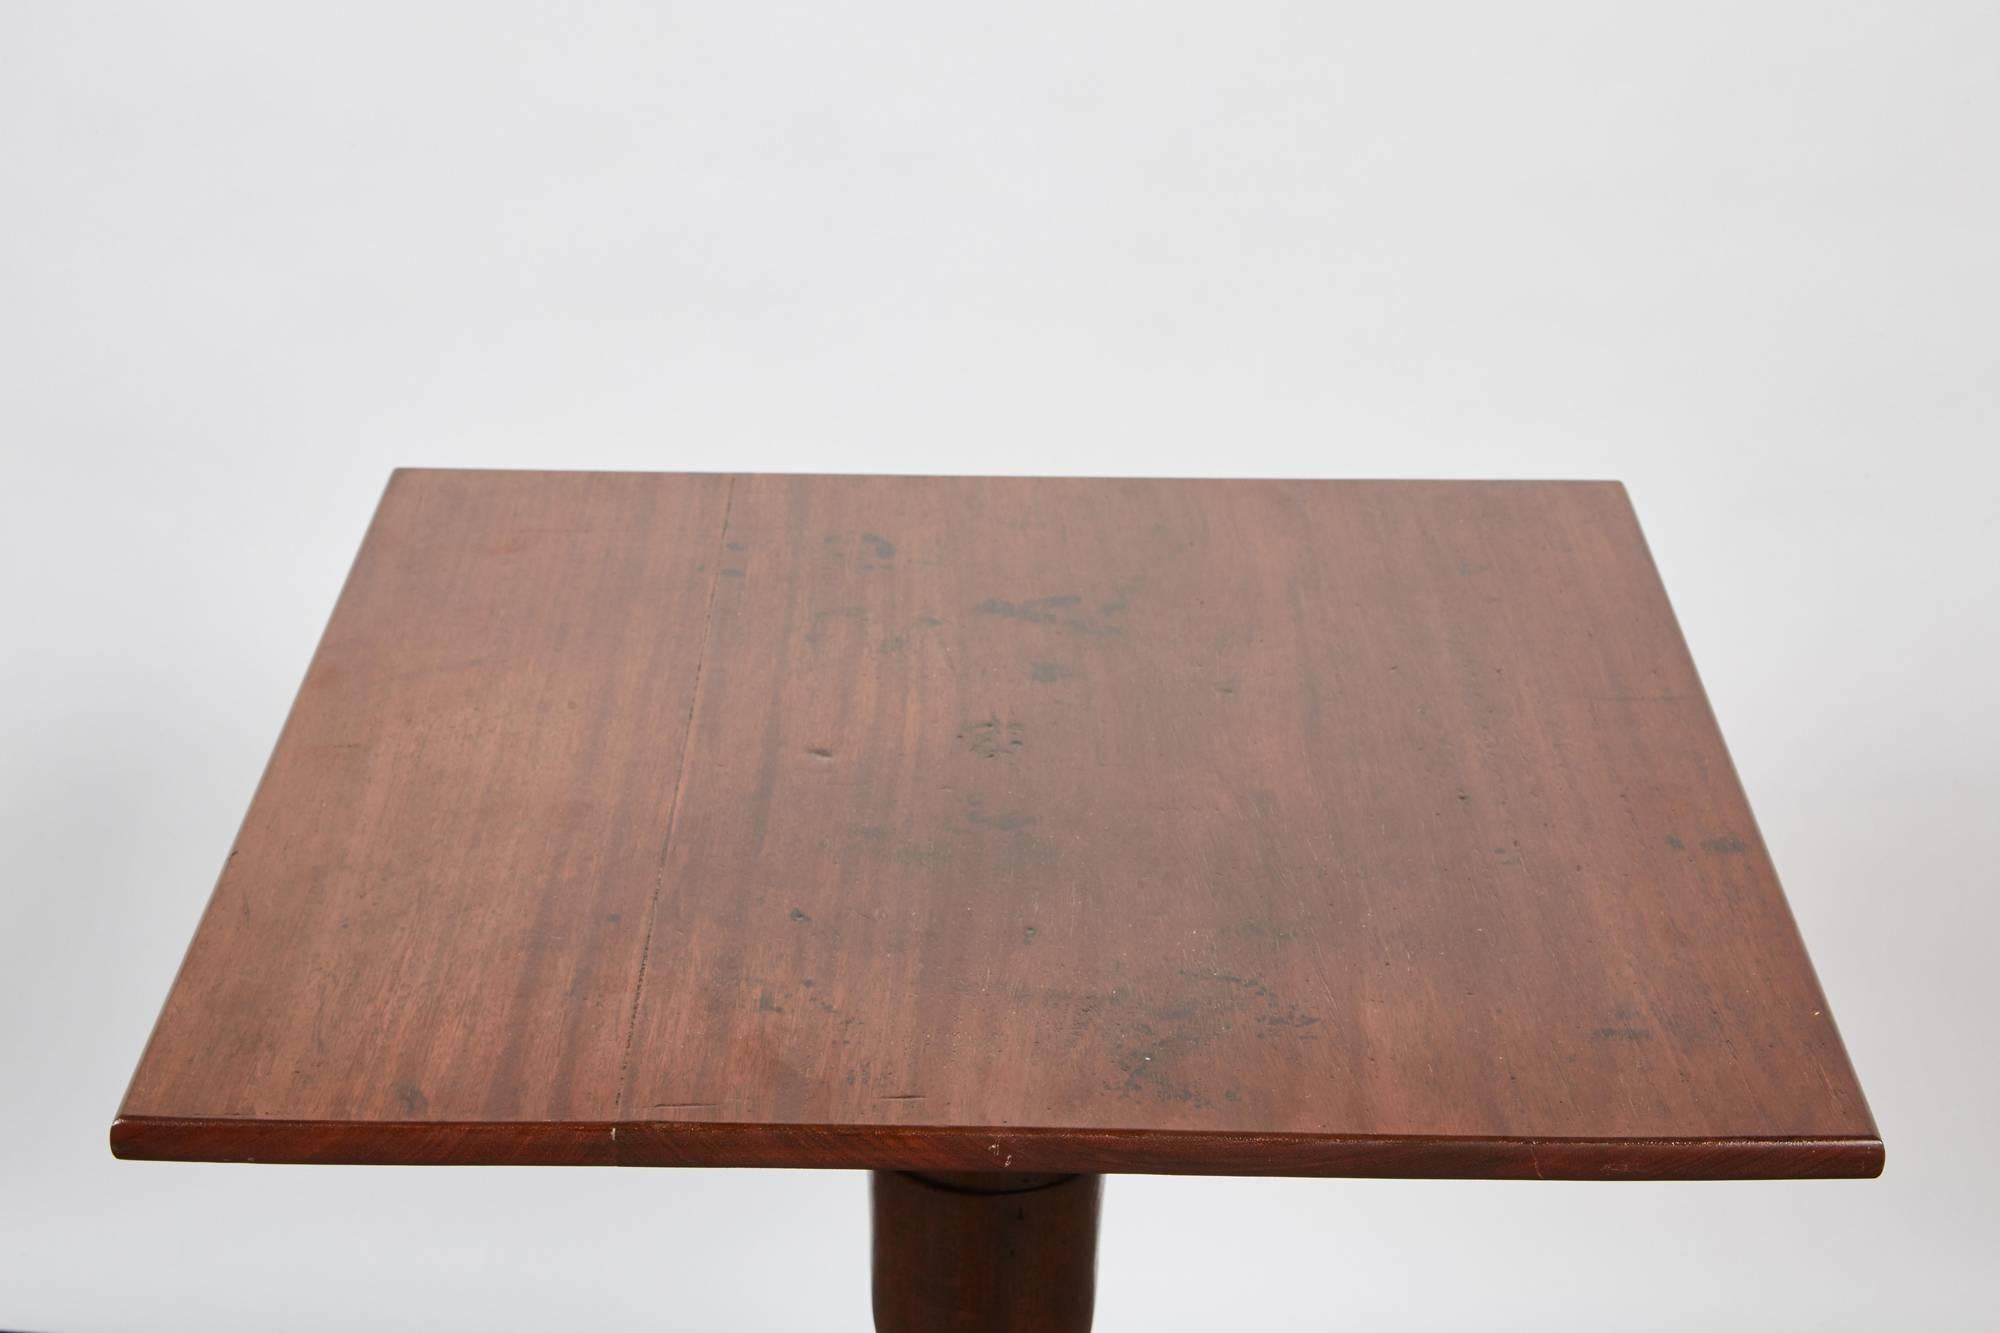 Colonial Revival Mid-19th Century Tindalo Wood Square Top Pedestal Table